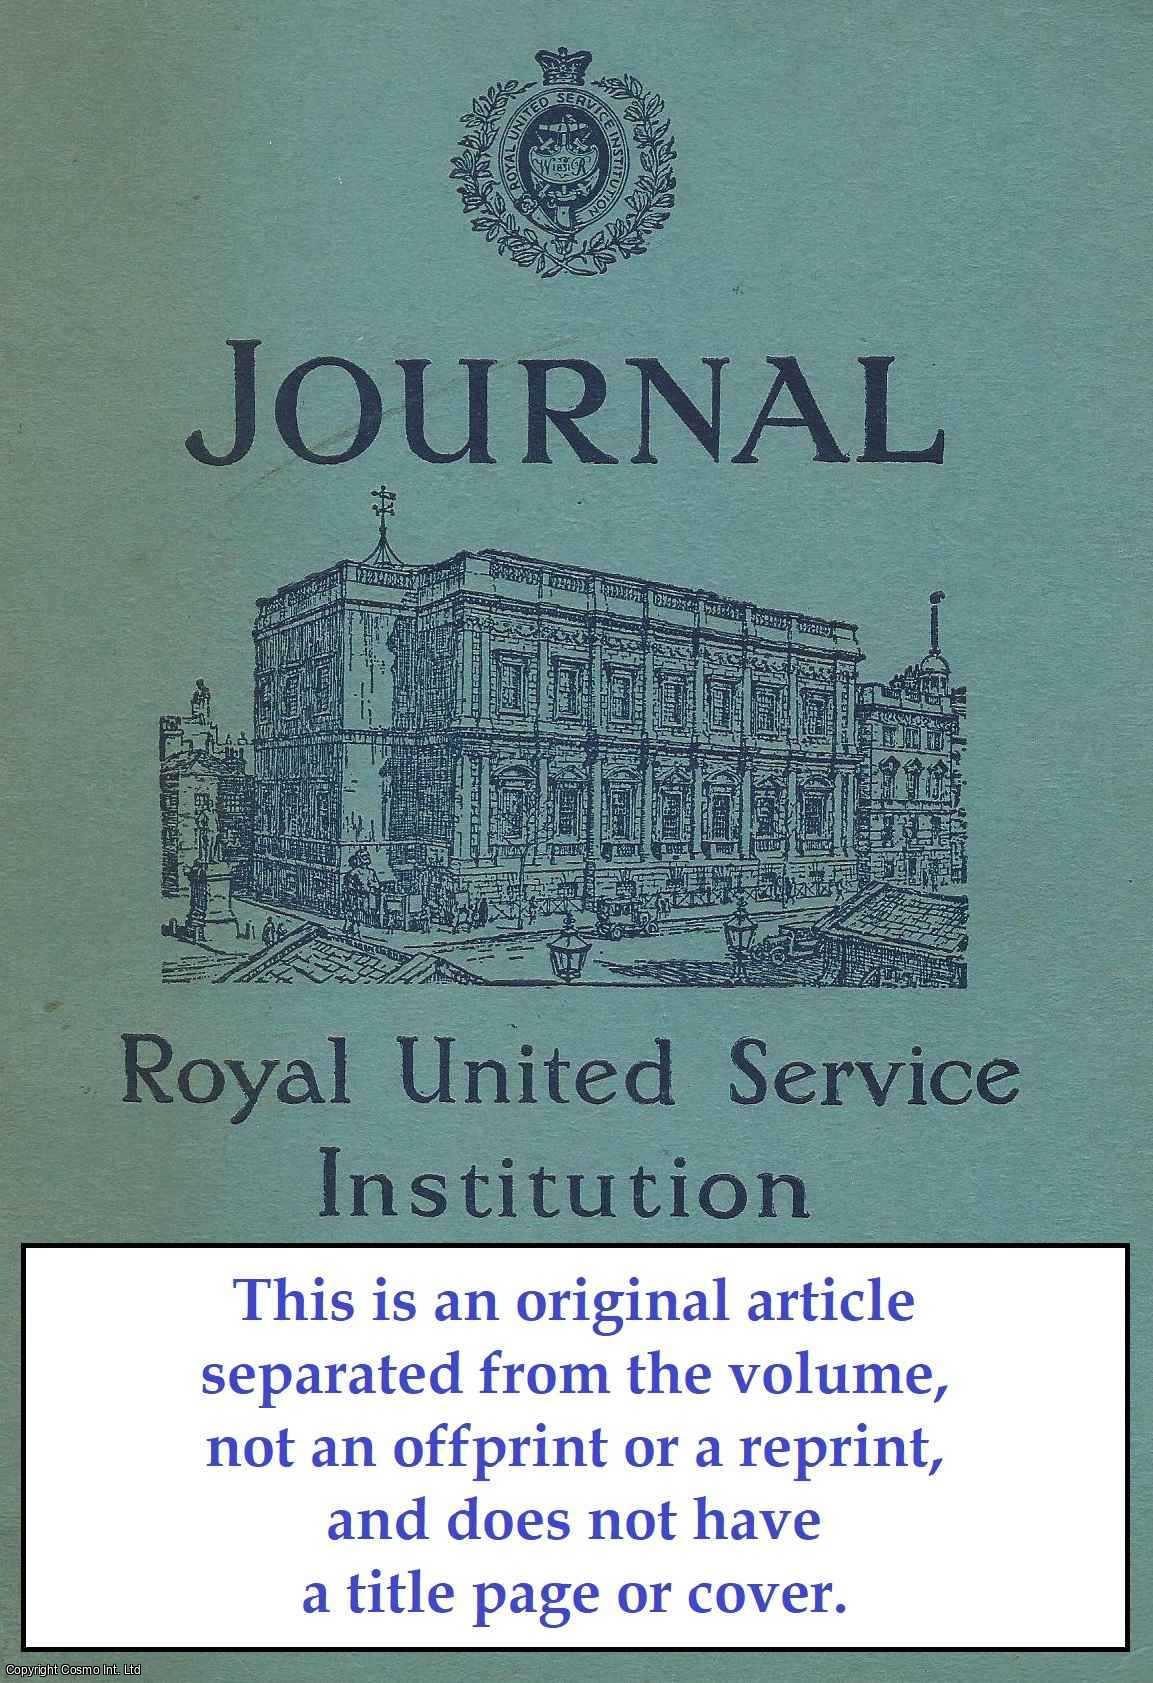 John Wilkinson - Selection and Education of Officers of The Future. An original article from The Royal United Service Institution Journal, 1970.